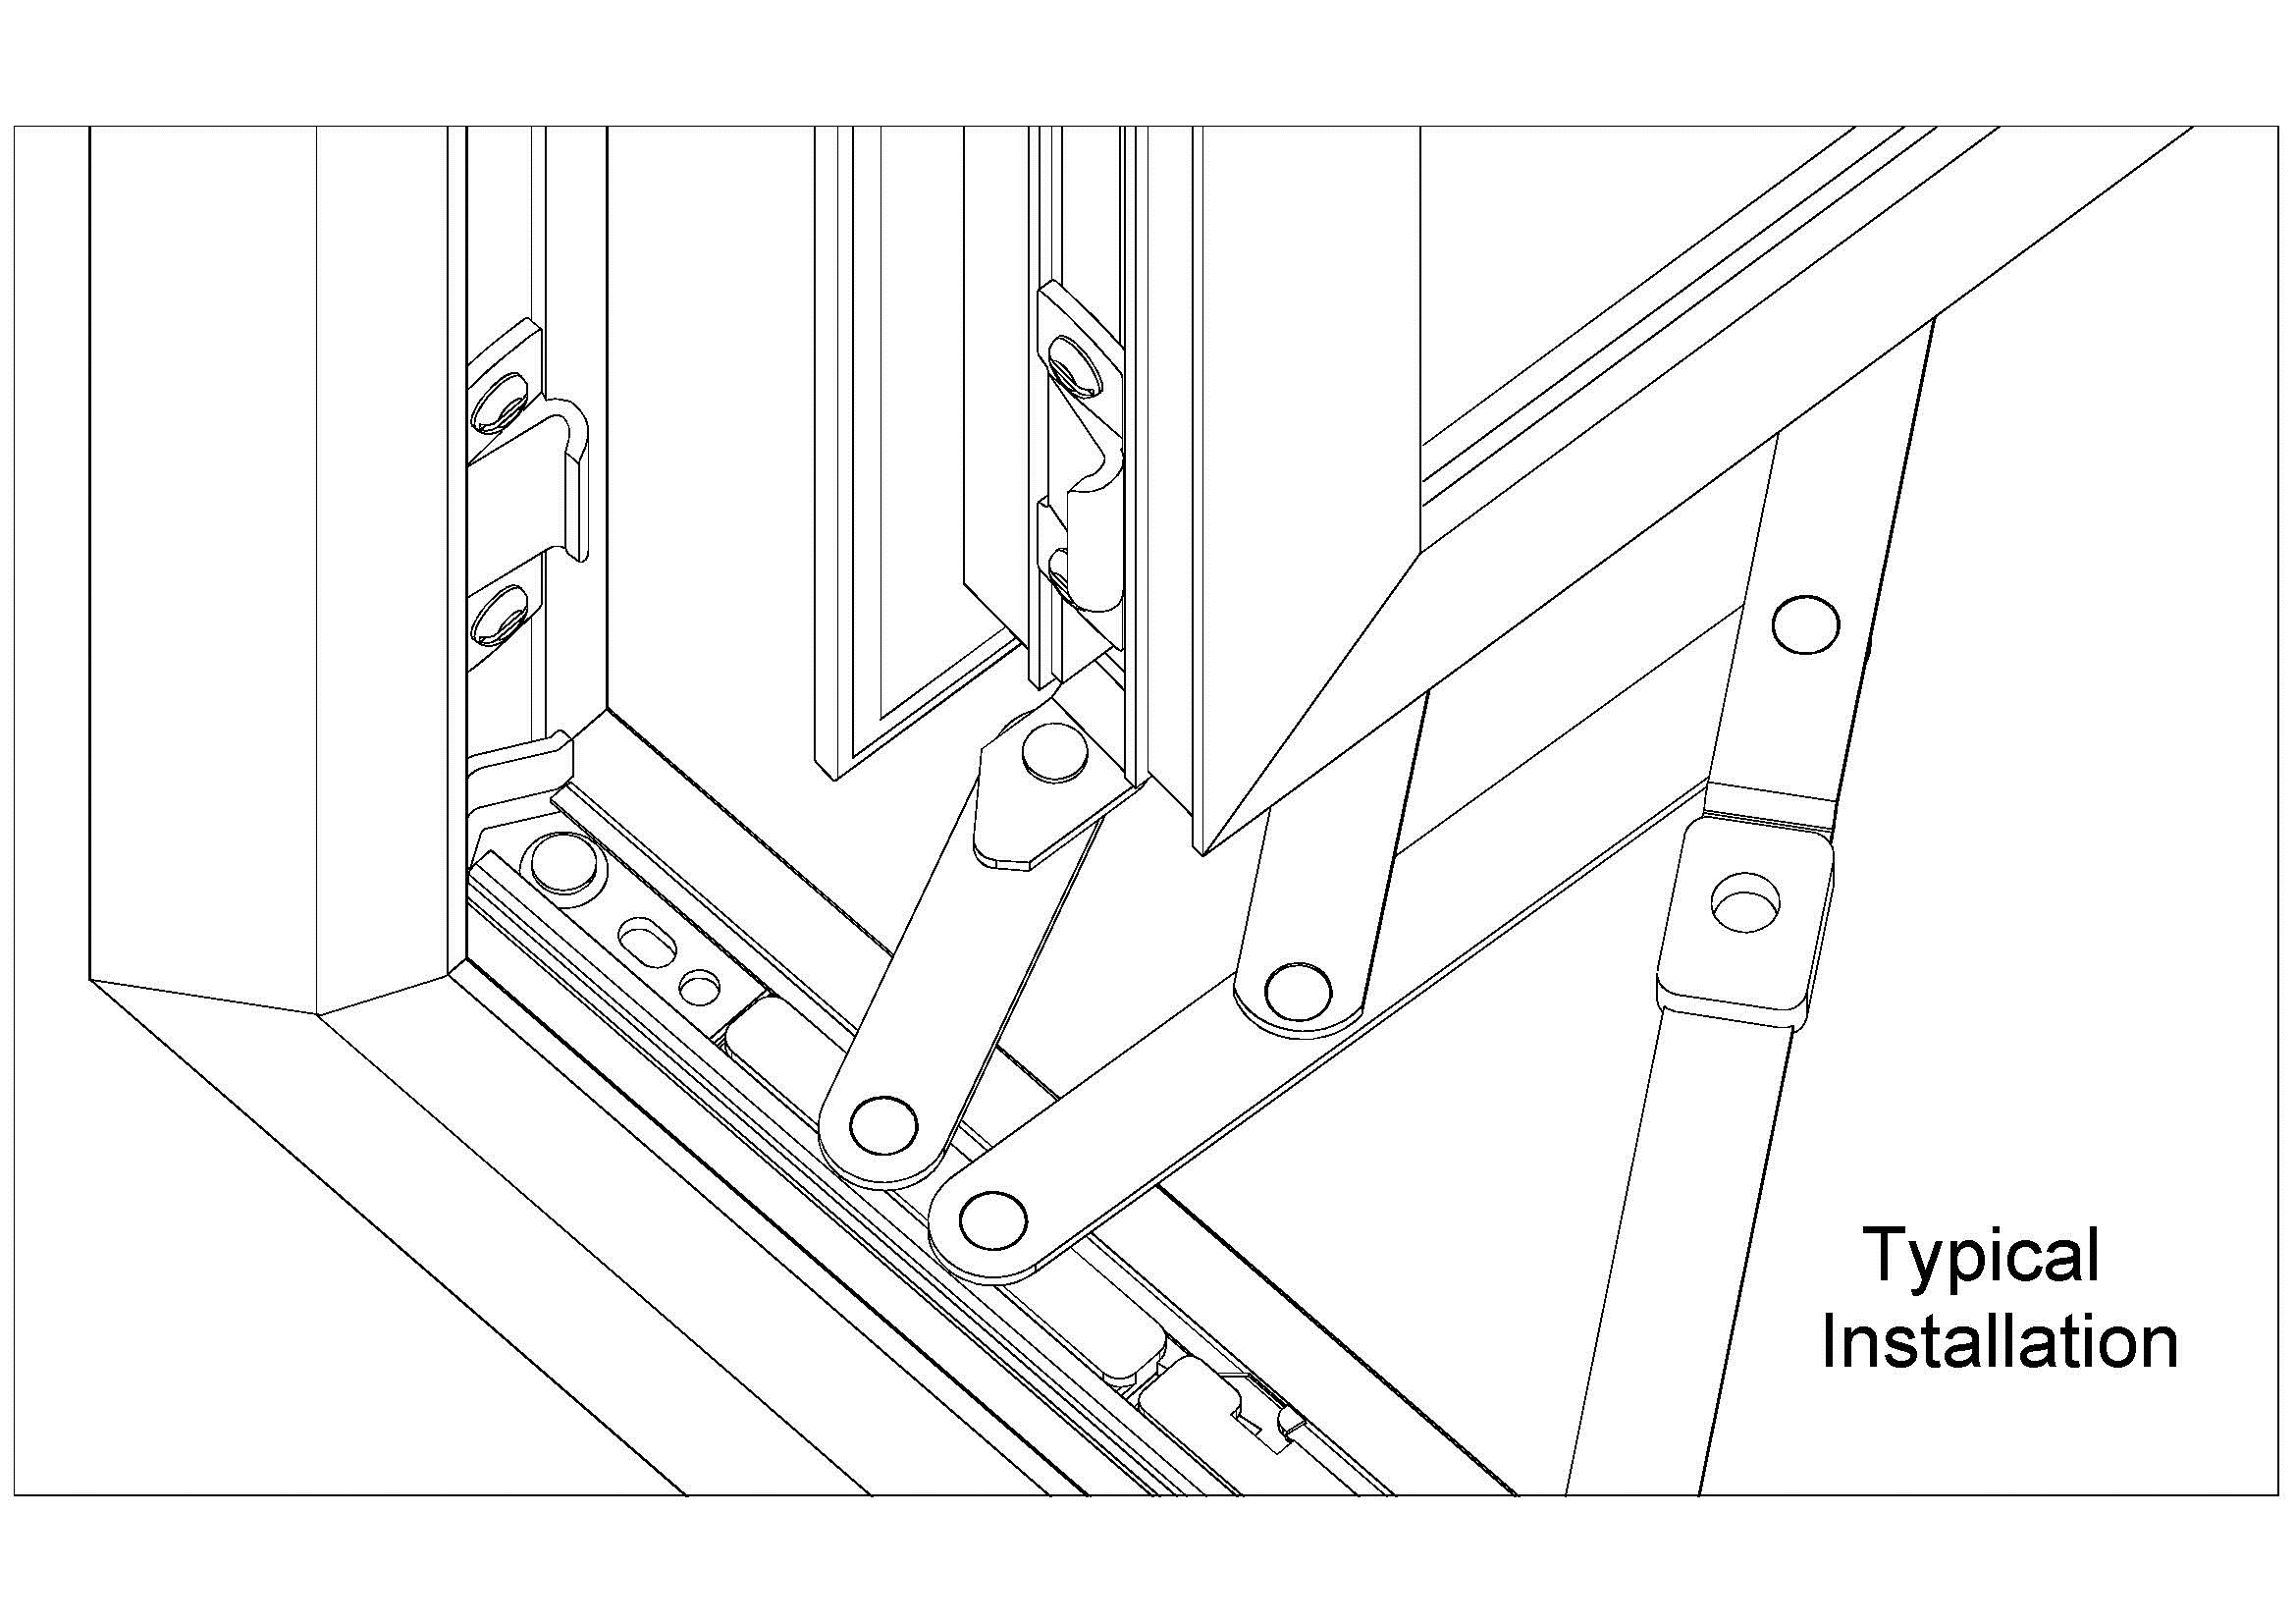 D77 Typical X-tra Bolt on Window Installation drawing jpeg